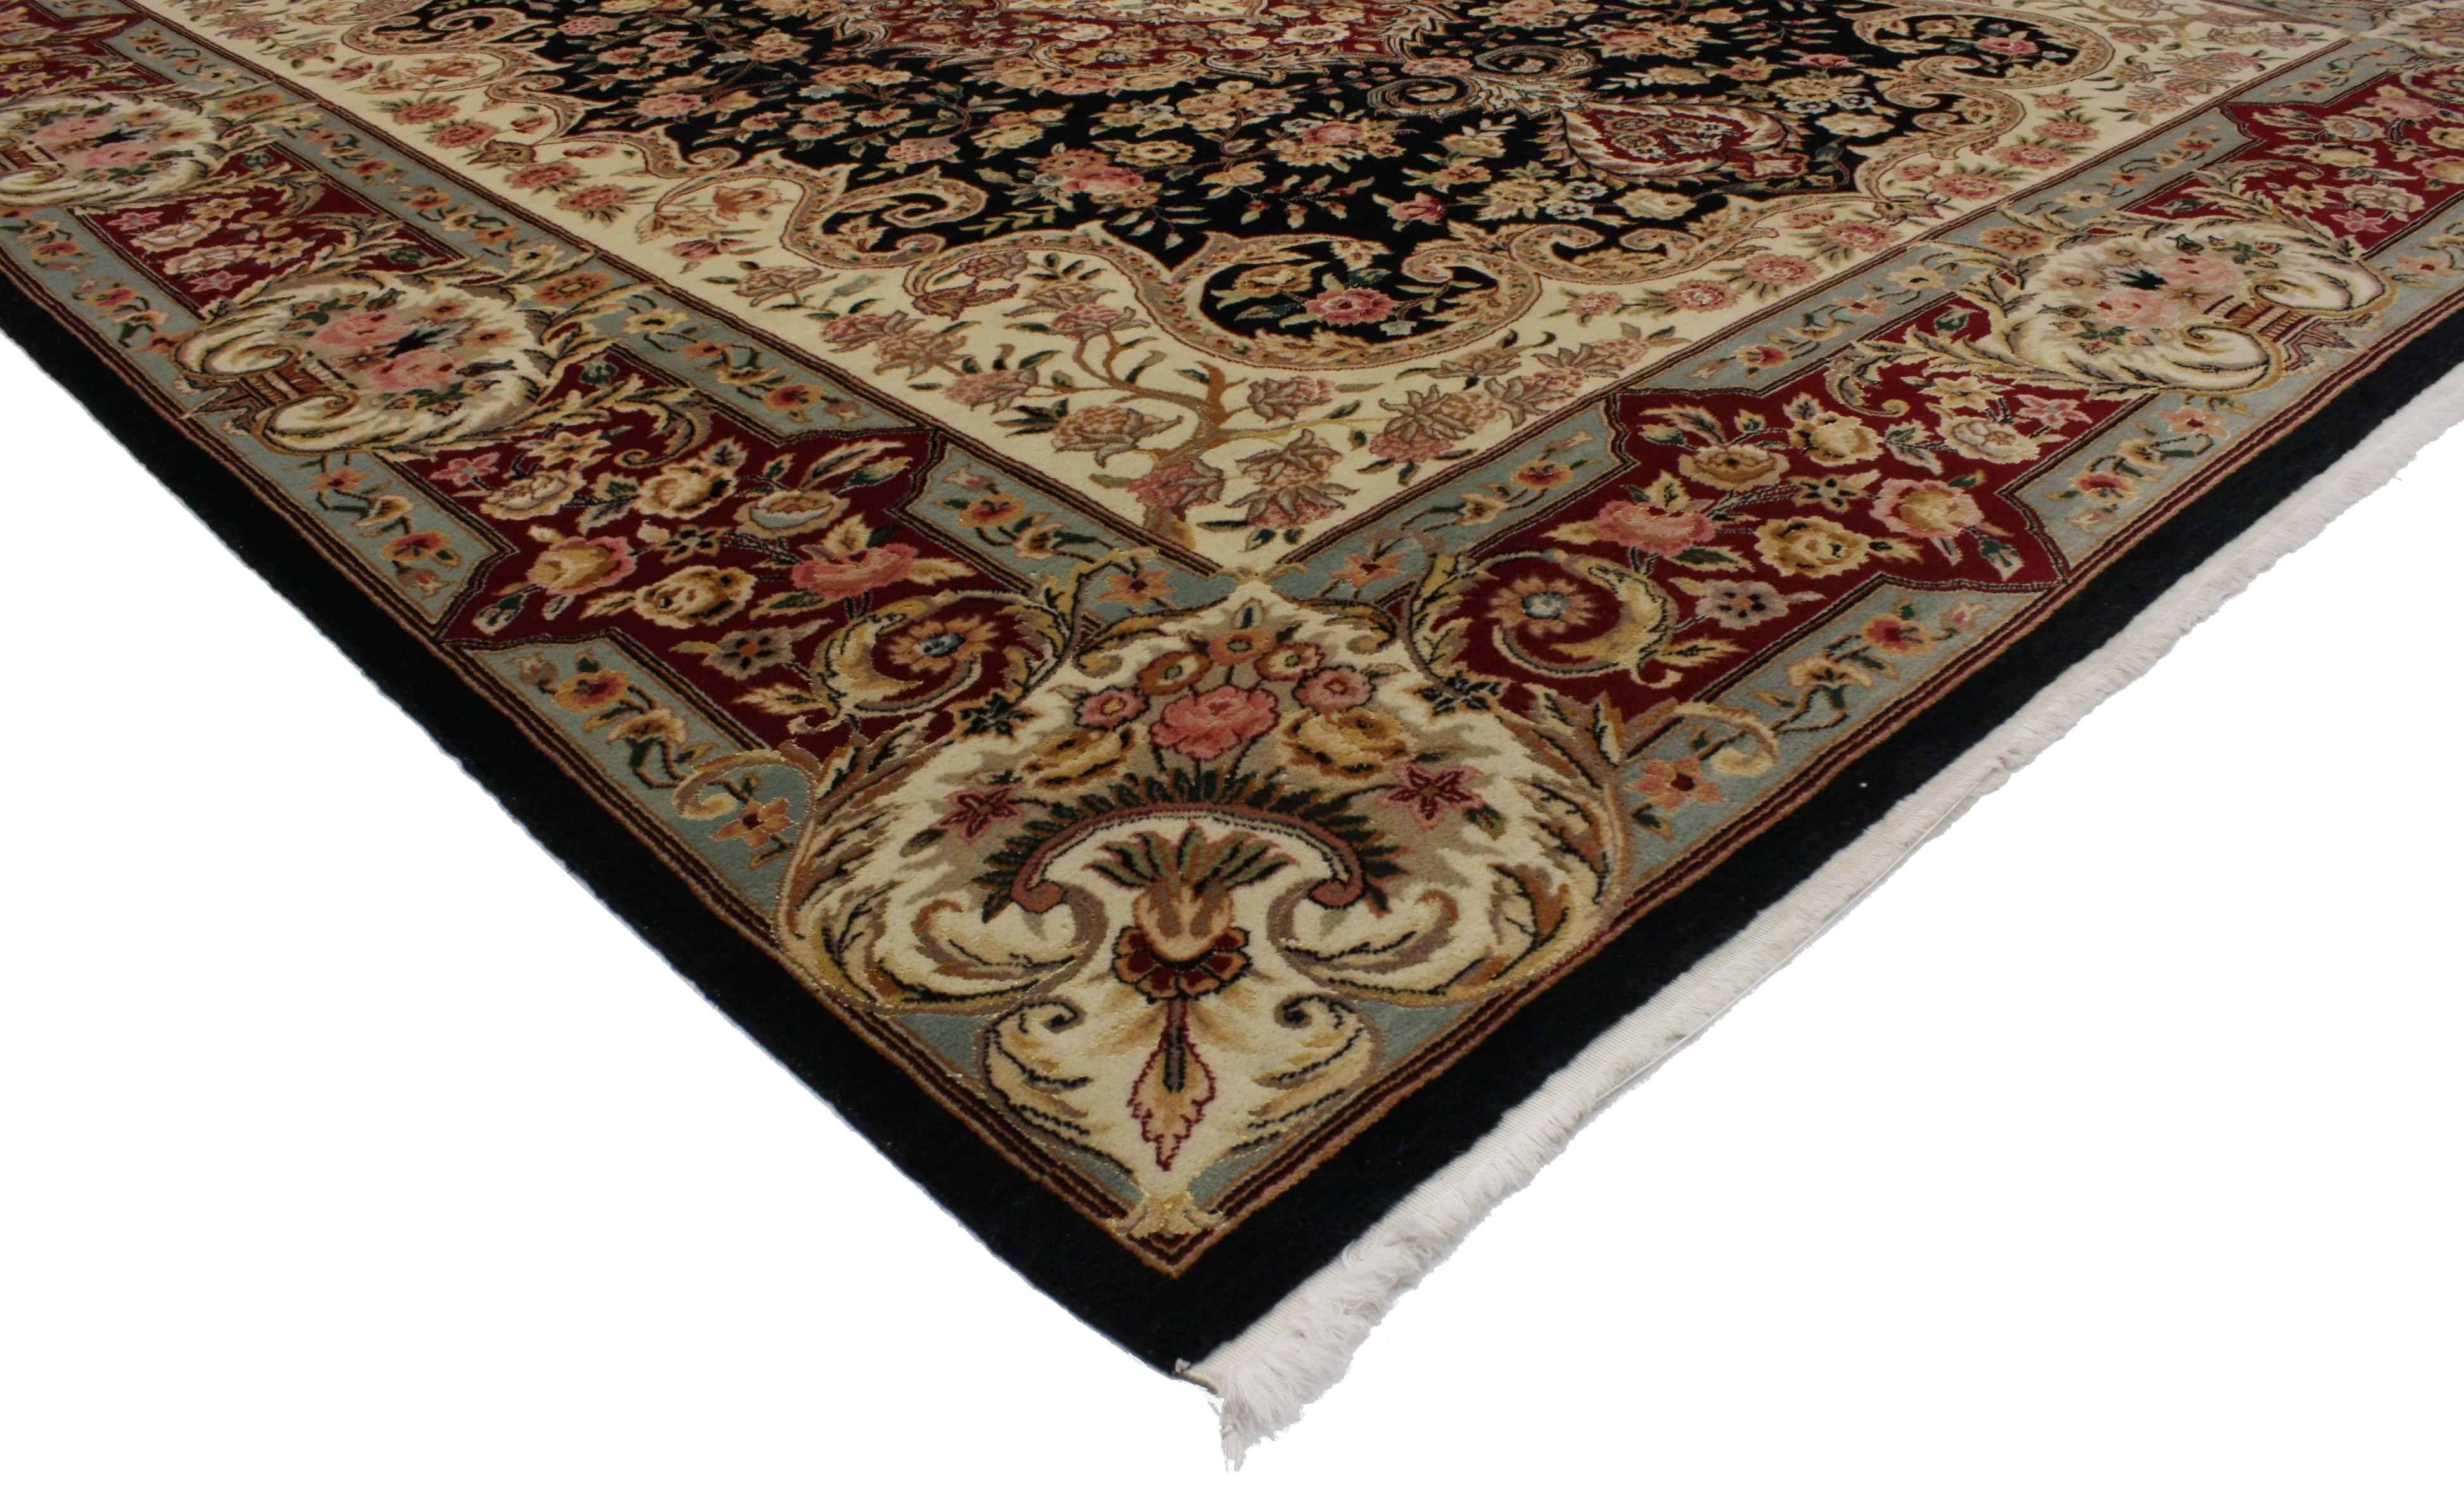 76698, New Persian Style Rug with Traditional Kirman Design. This opulent hand-knotted wool Persian Kirman style rug features an intricate centre medallion with a stylized floral motif in creamy-beige, burgundy and pink. The medallion floats on a